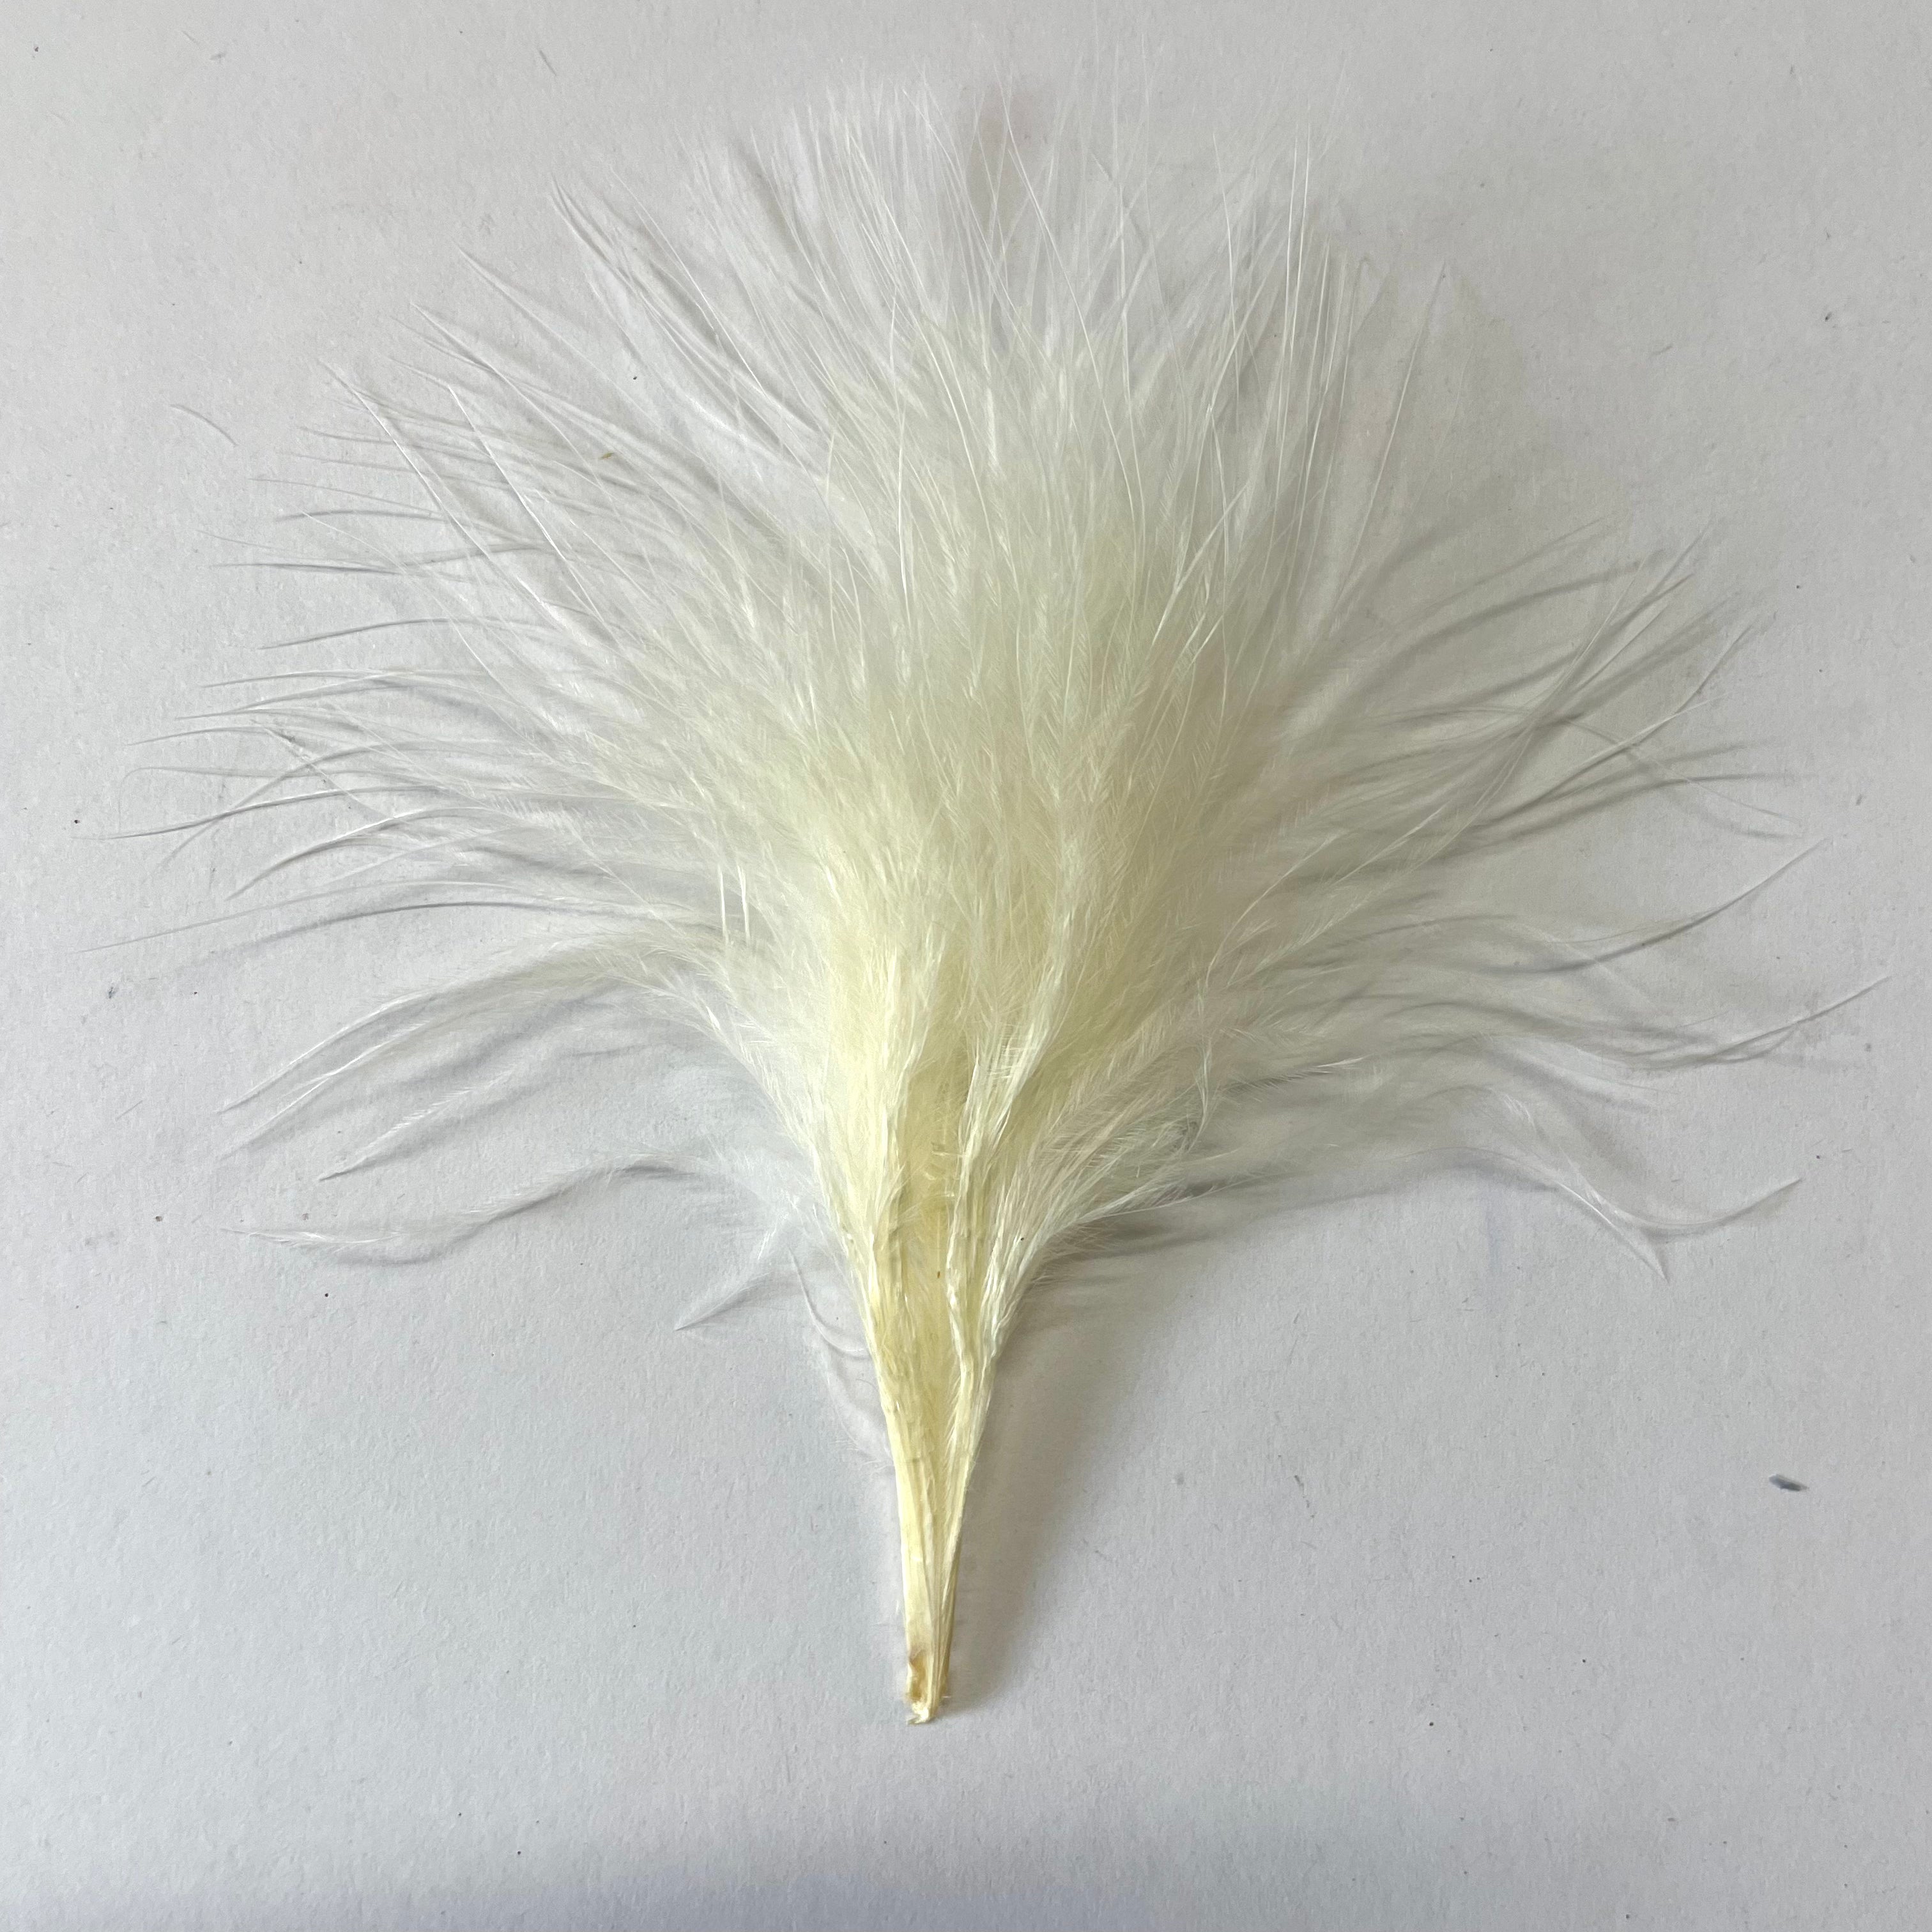 Itty Bitty Marabou Feather Plumage Pack 10 grams - Ivory